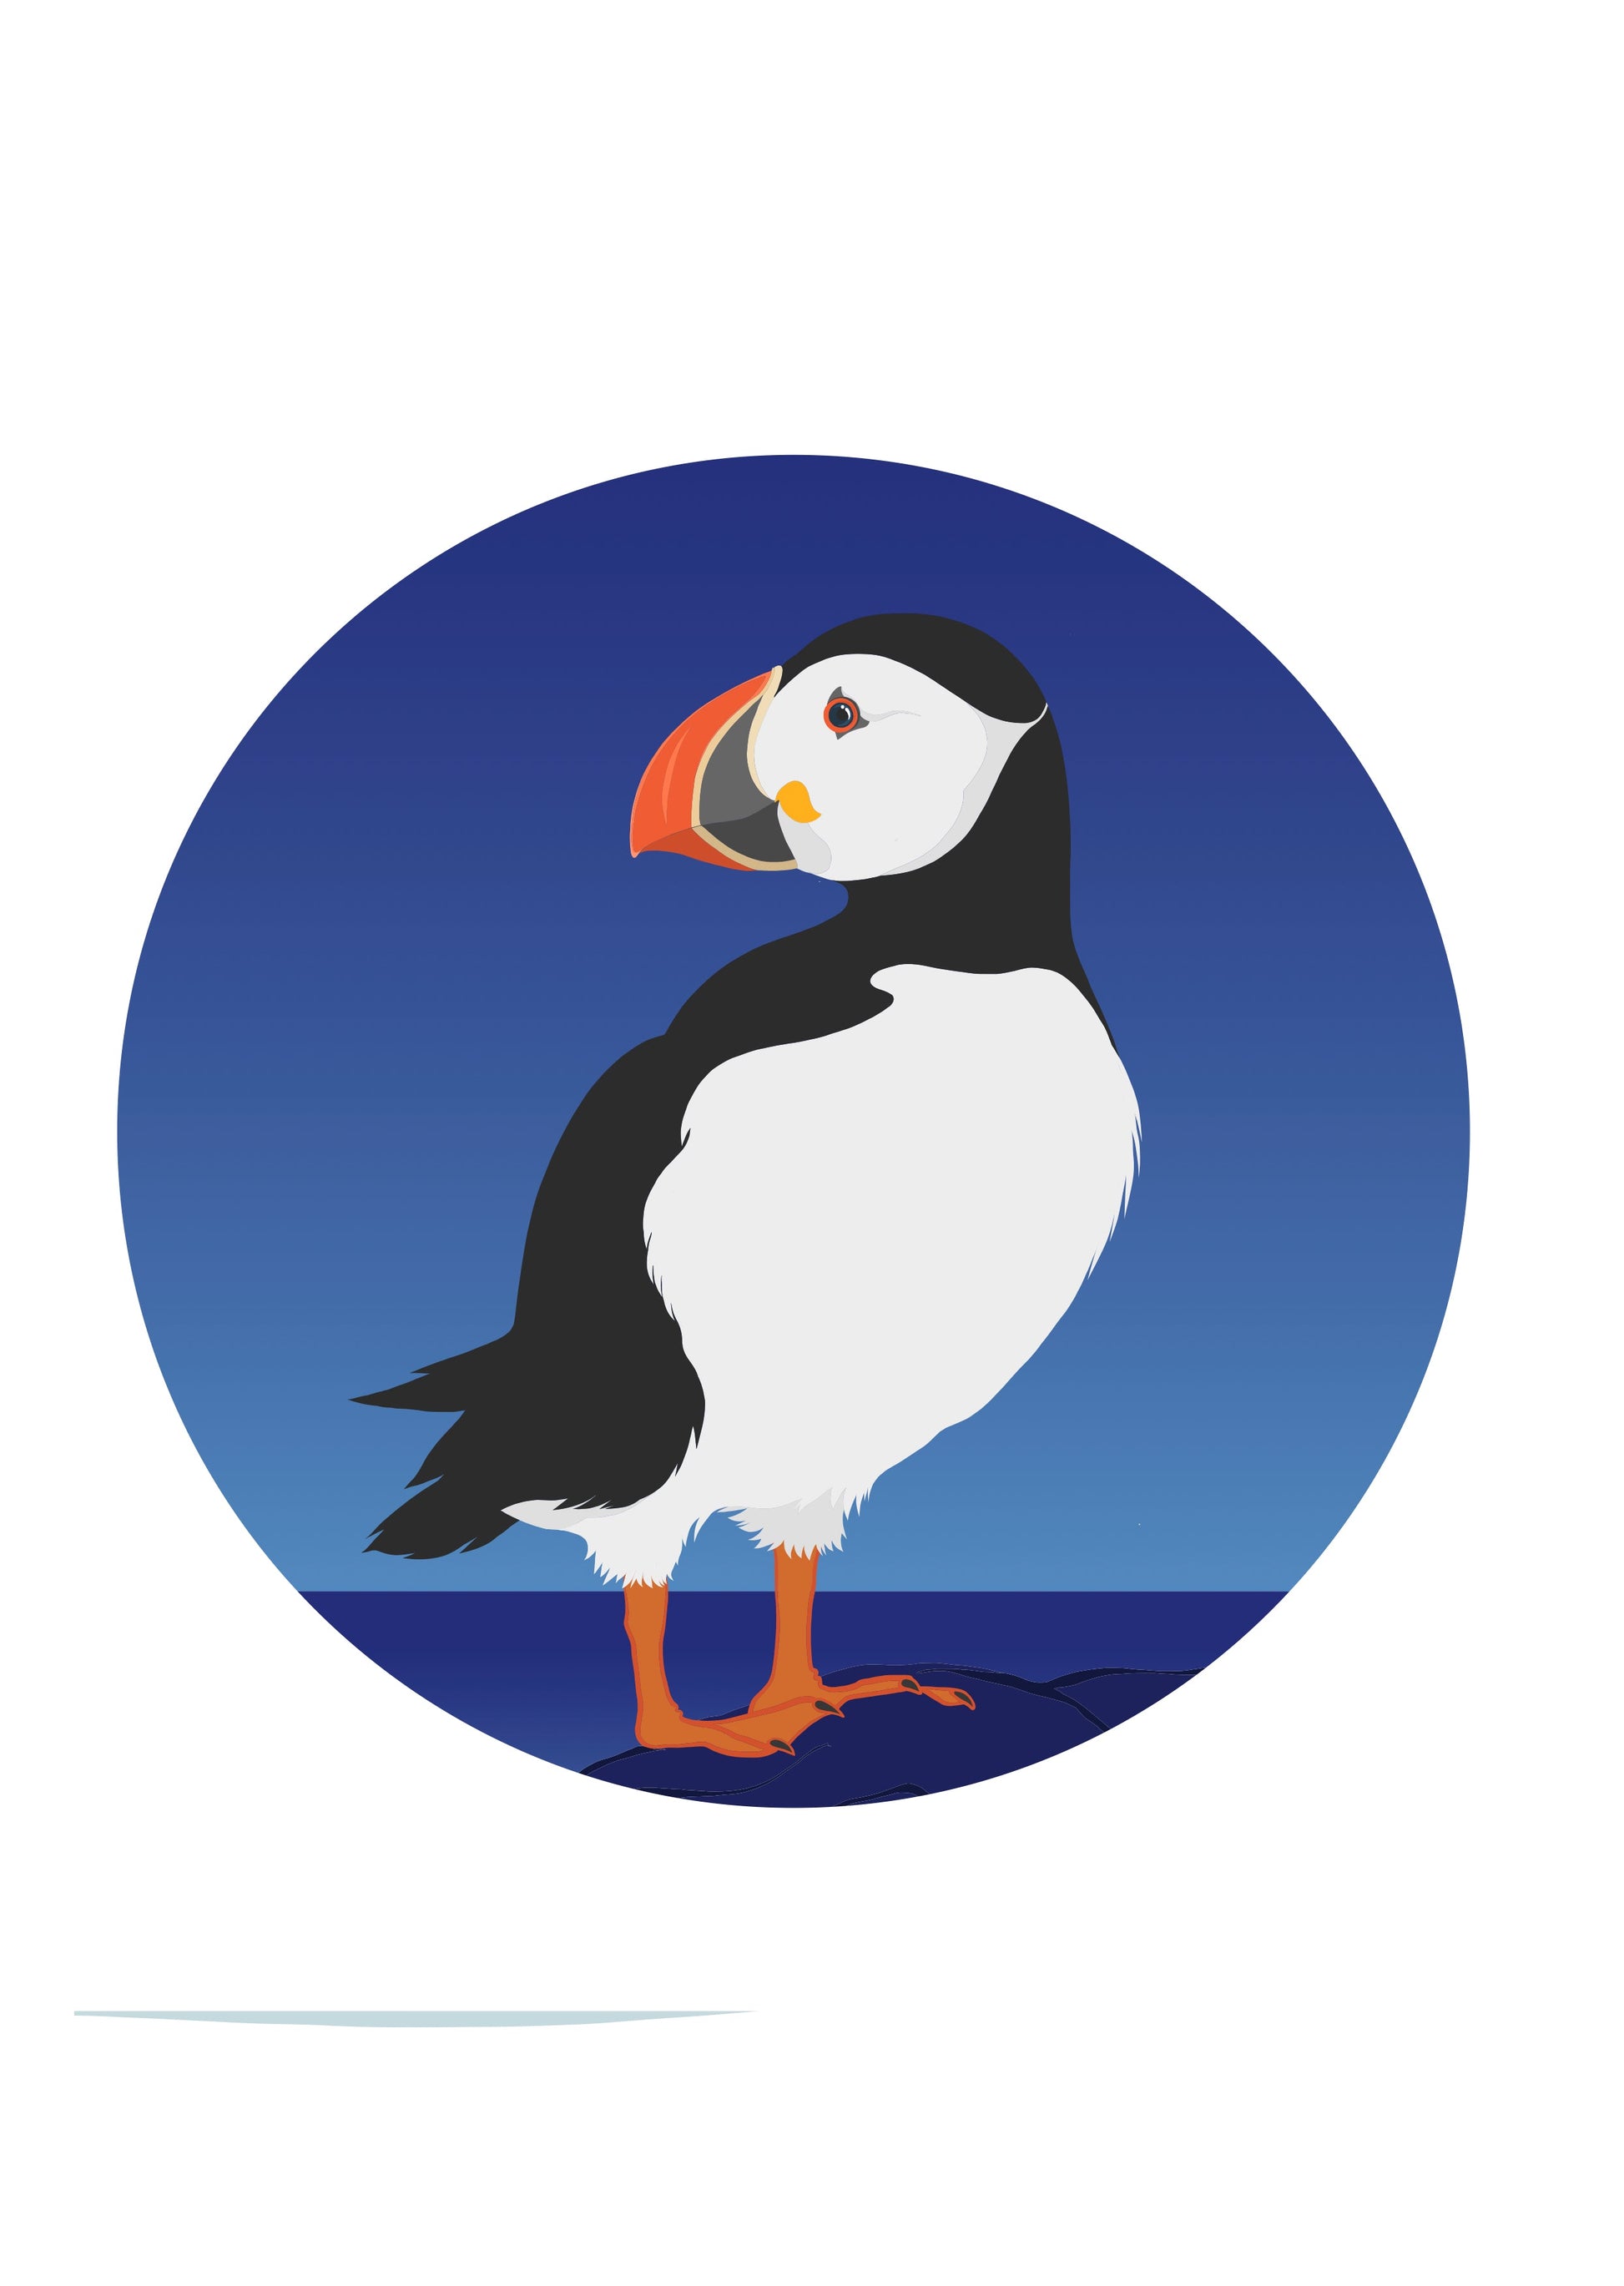 Art spot, wall decal of the Puffin of New Zealand, by Hansby Design